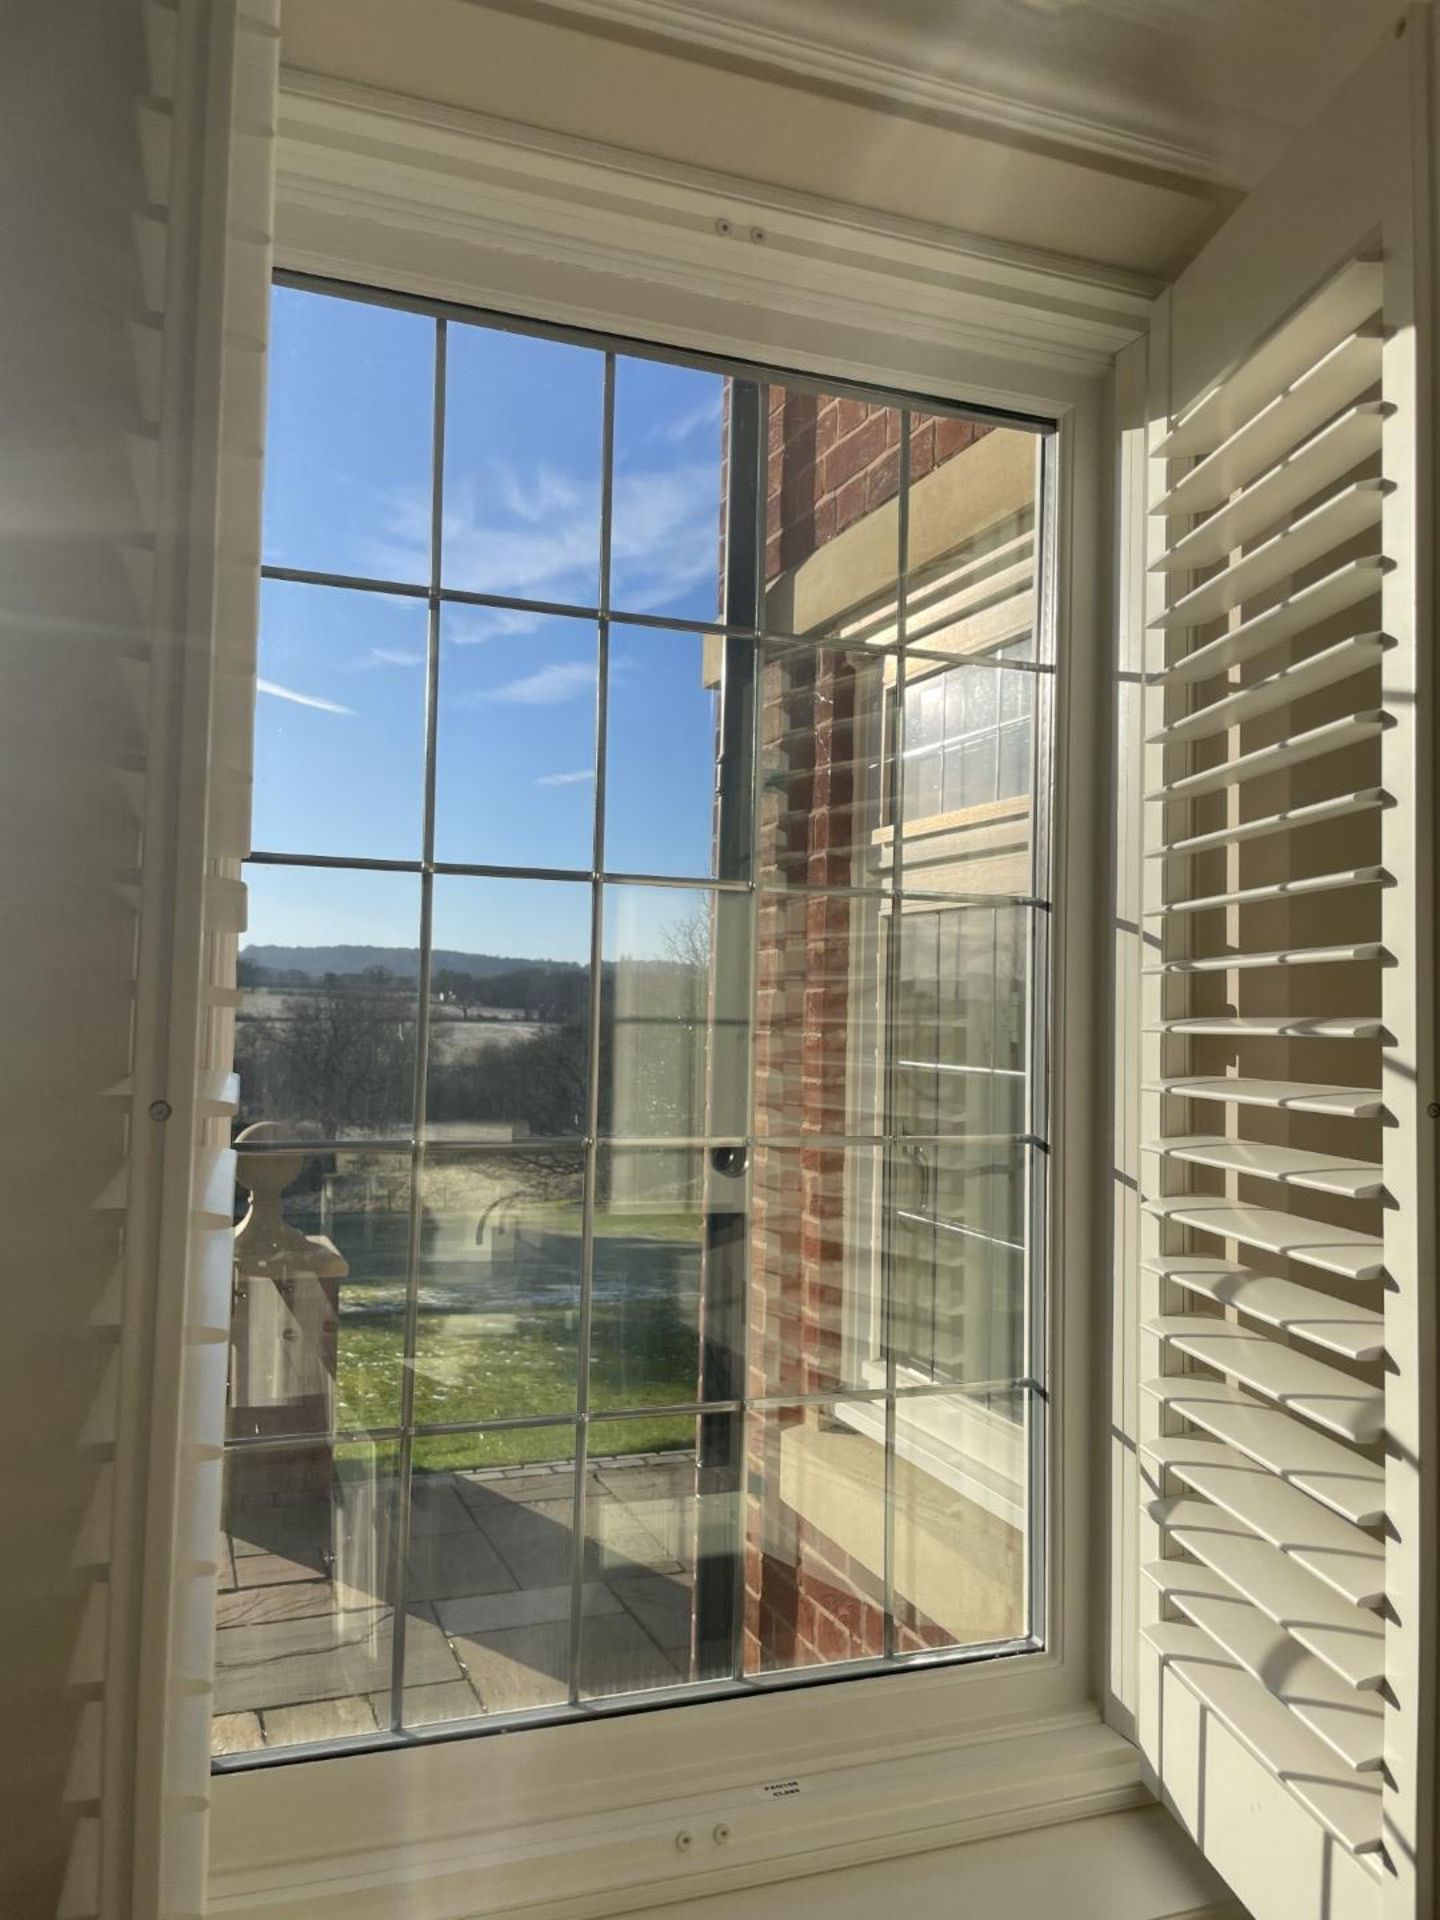 1 x Hardwood Timber Double Glazed Window Frames fitted with Shutter Blinds, In White - Ref: PAN108 - Image 12 of 19